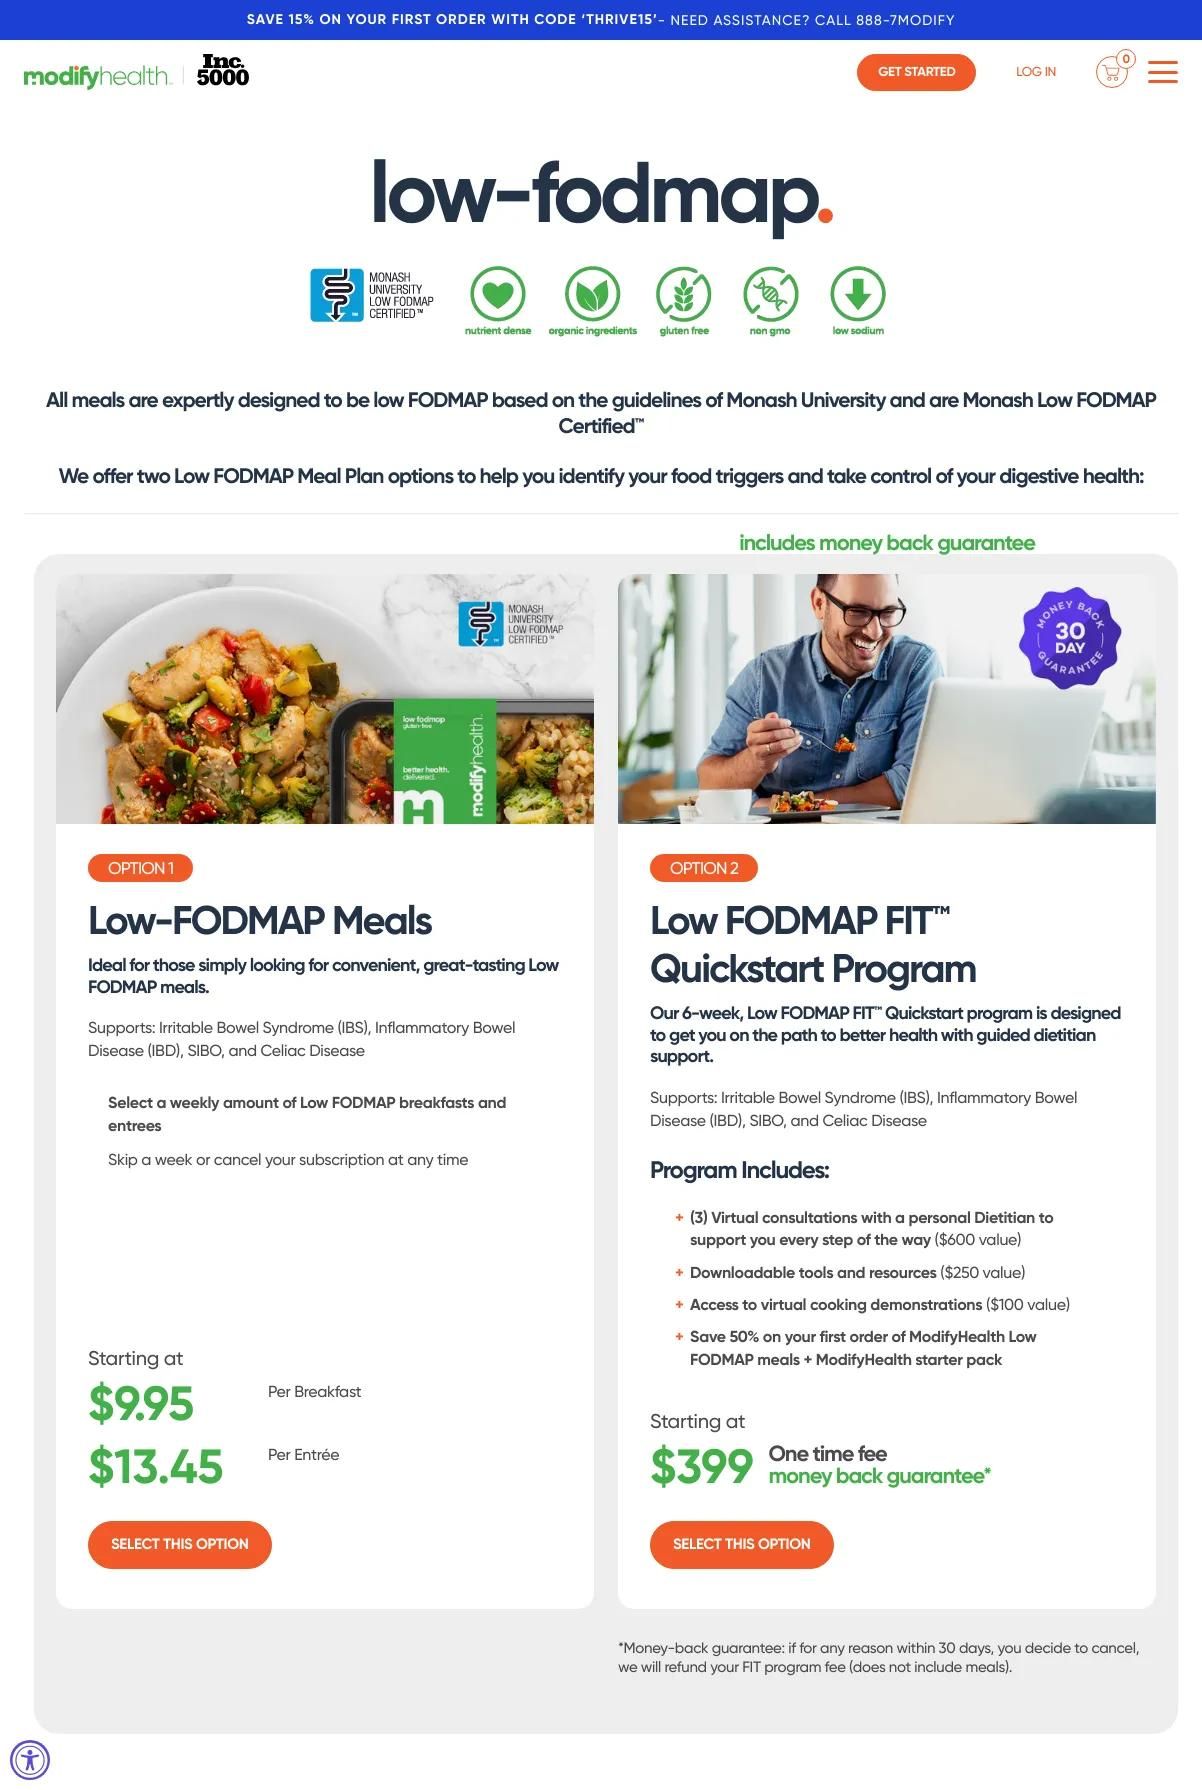 Screenshot 2 of ModifyHealth (Example Shopify Food and Beverage Website)